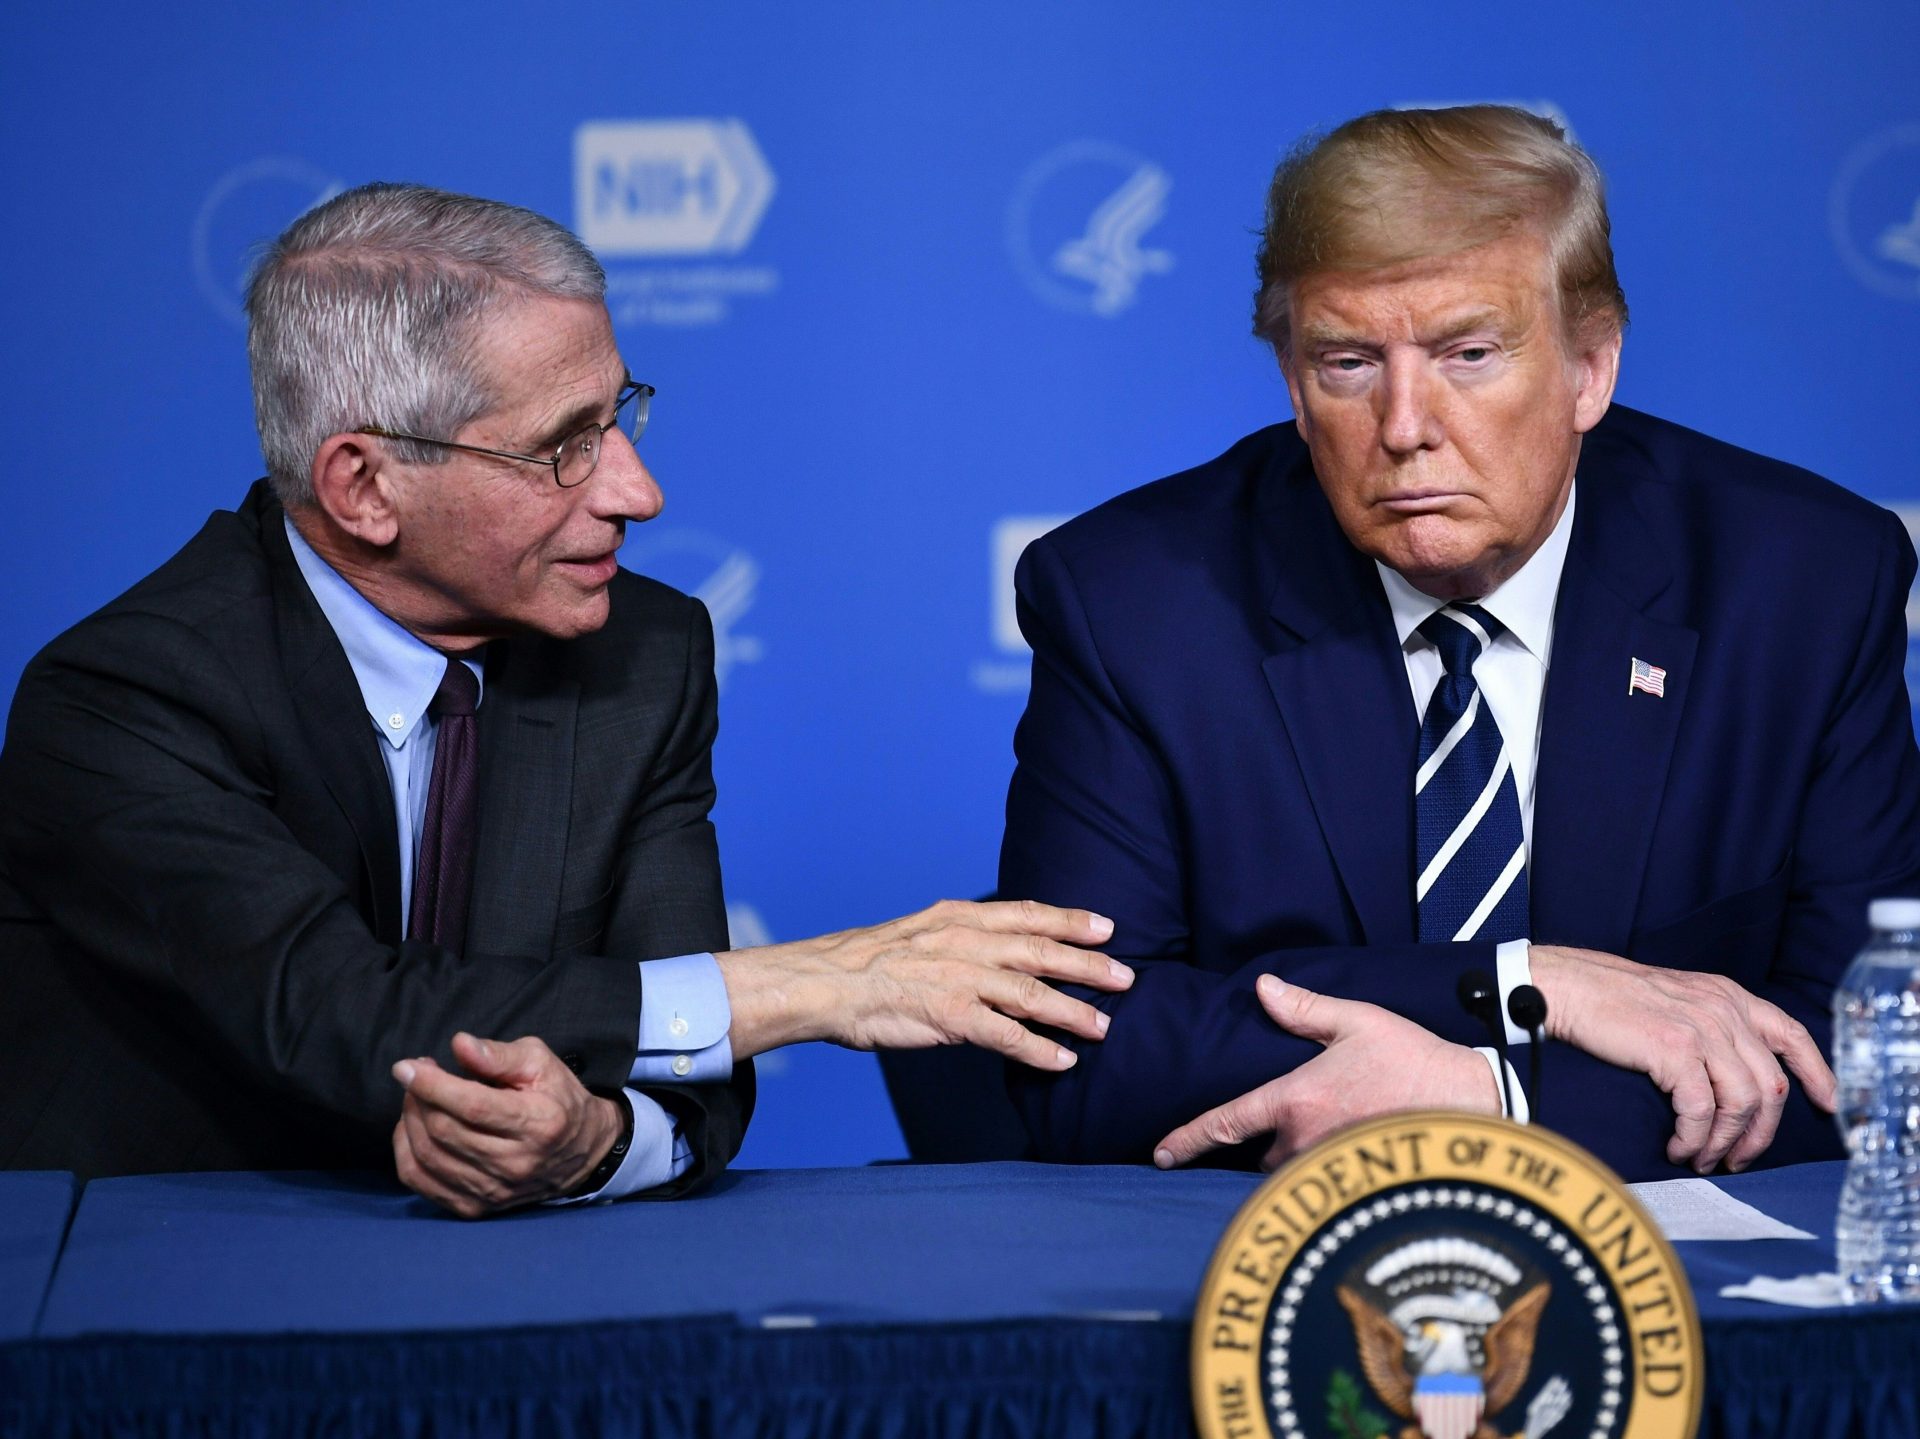 President Trump listens to Anthony Fauci, director of the NIH National Institute of Allergy and Infectious Diseases, after a tour earlier this week.